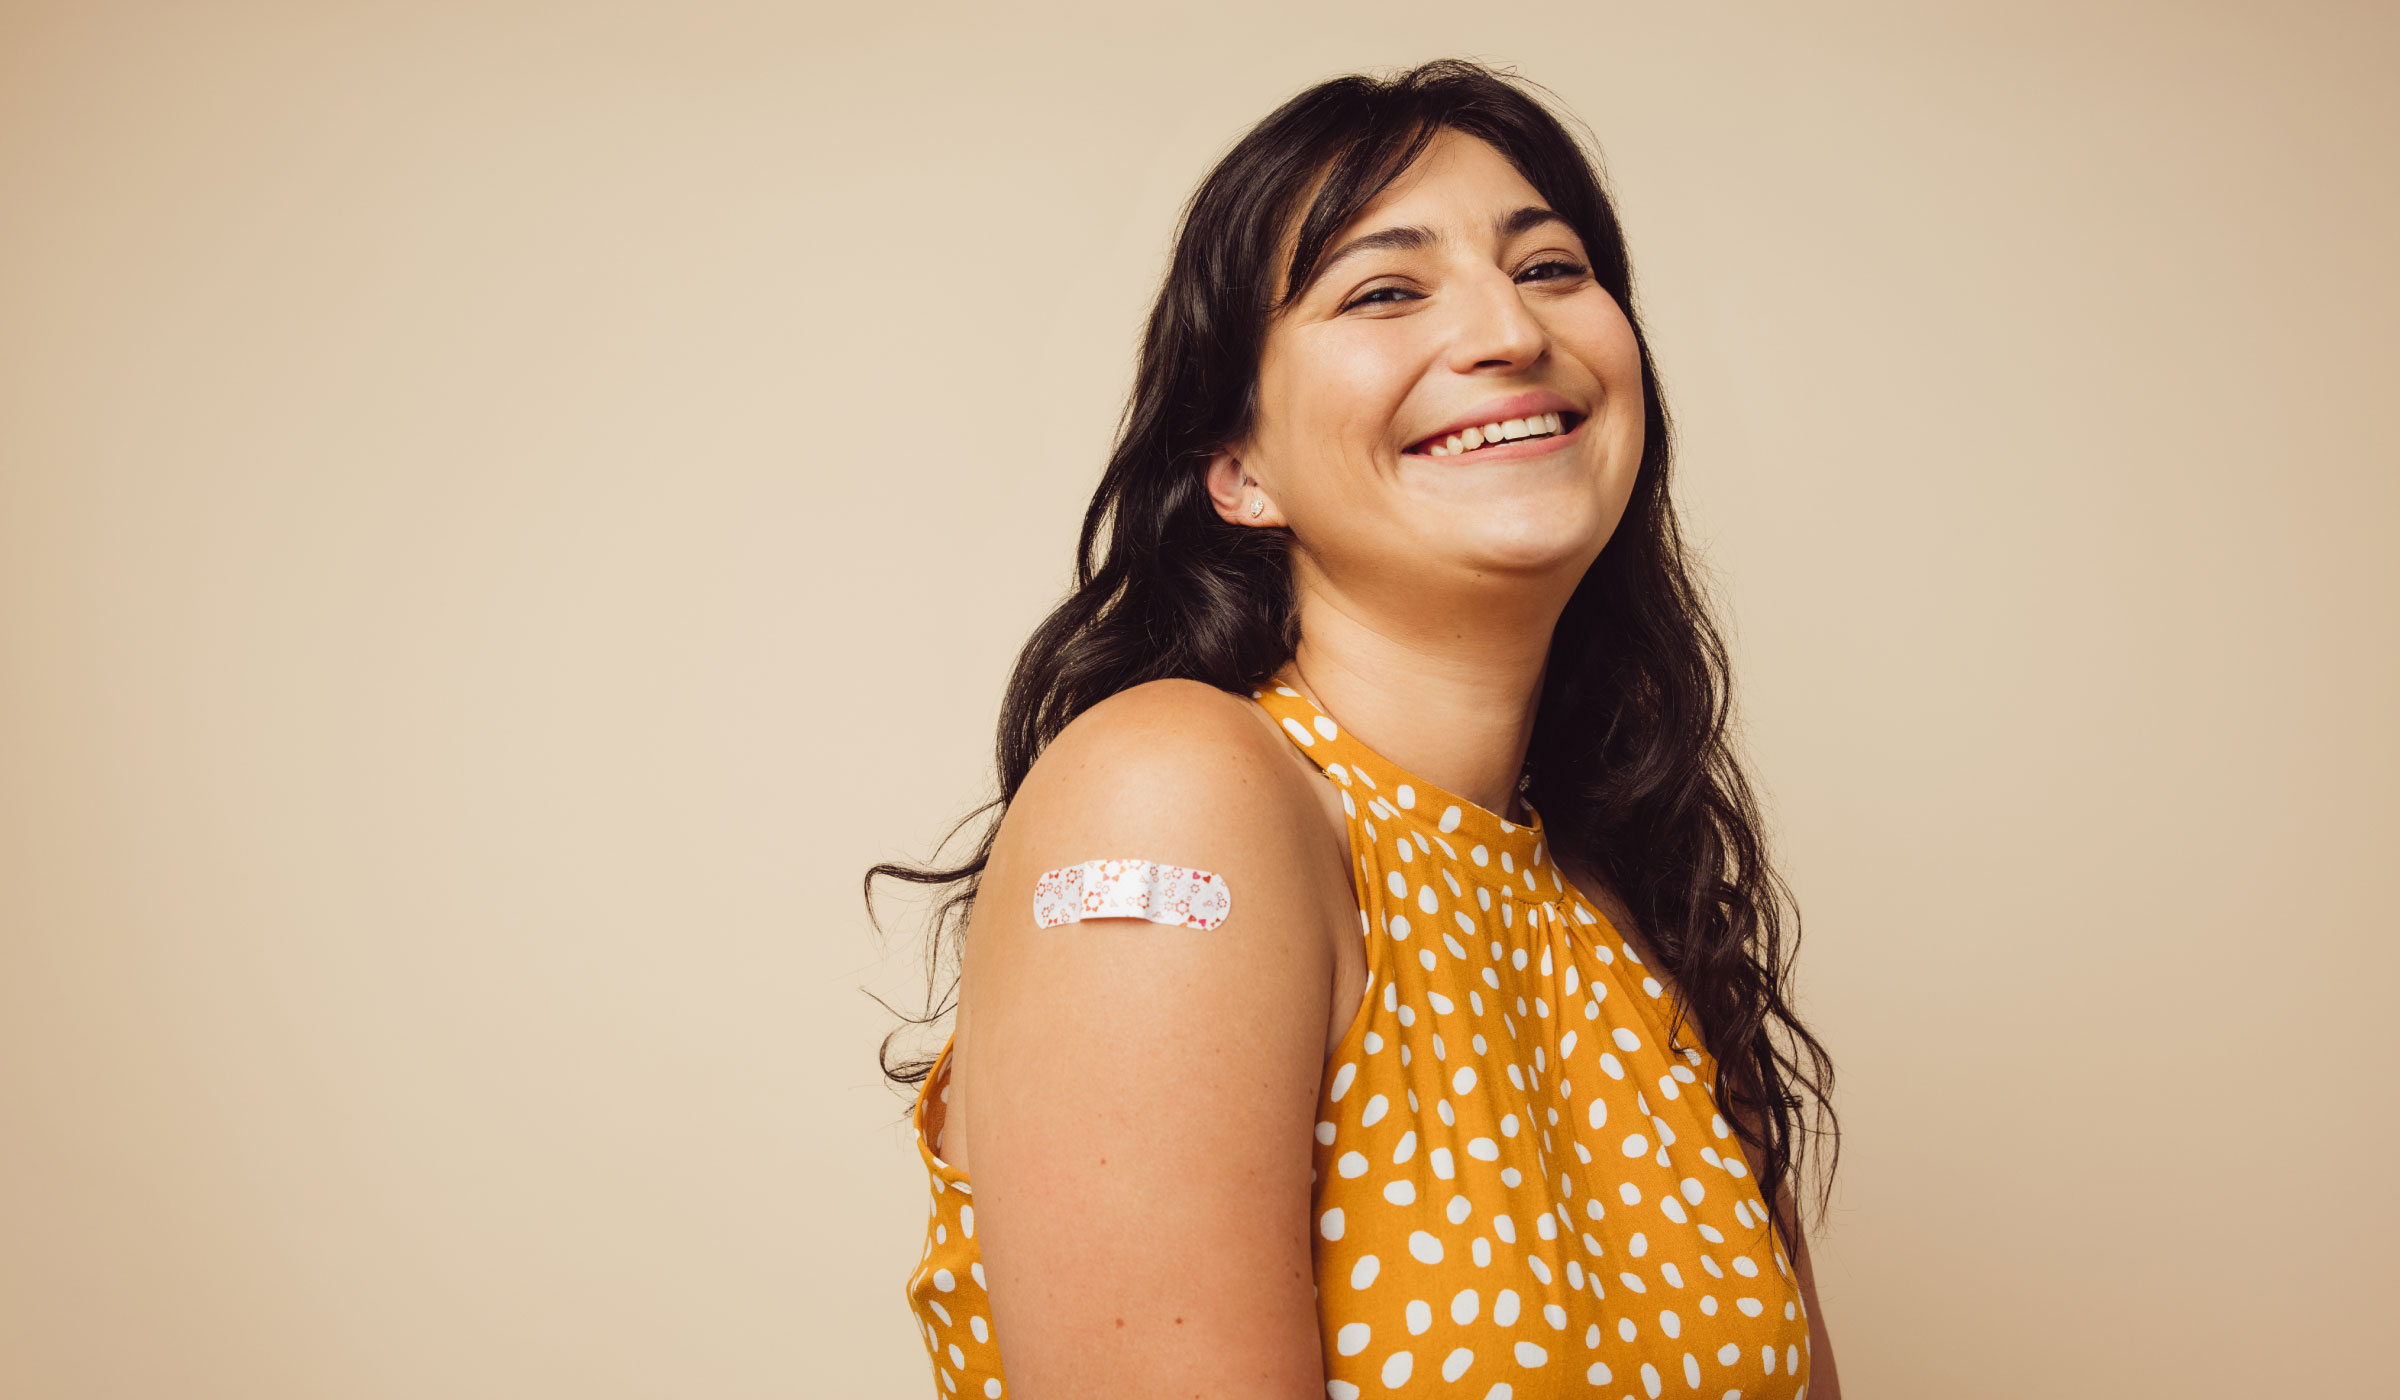 Woman with an adhesive bandage on her arm smiling at the camera